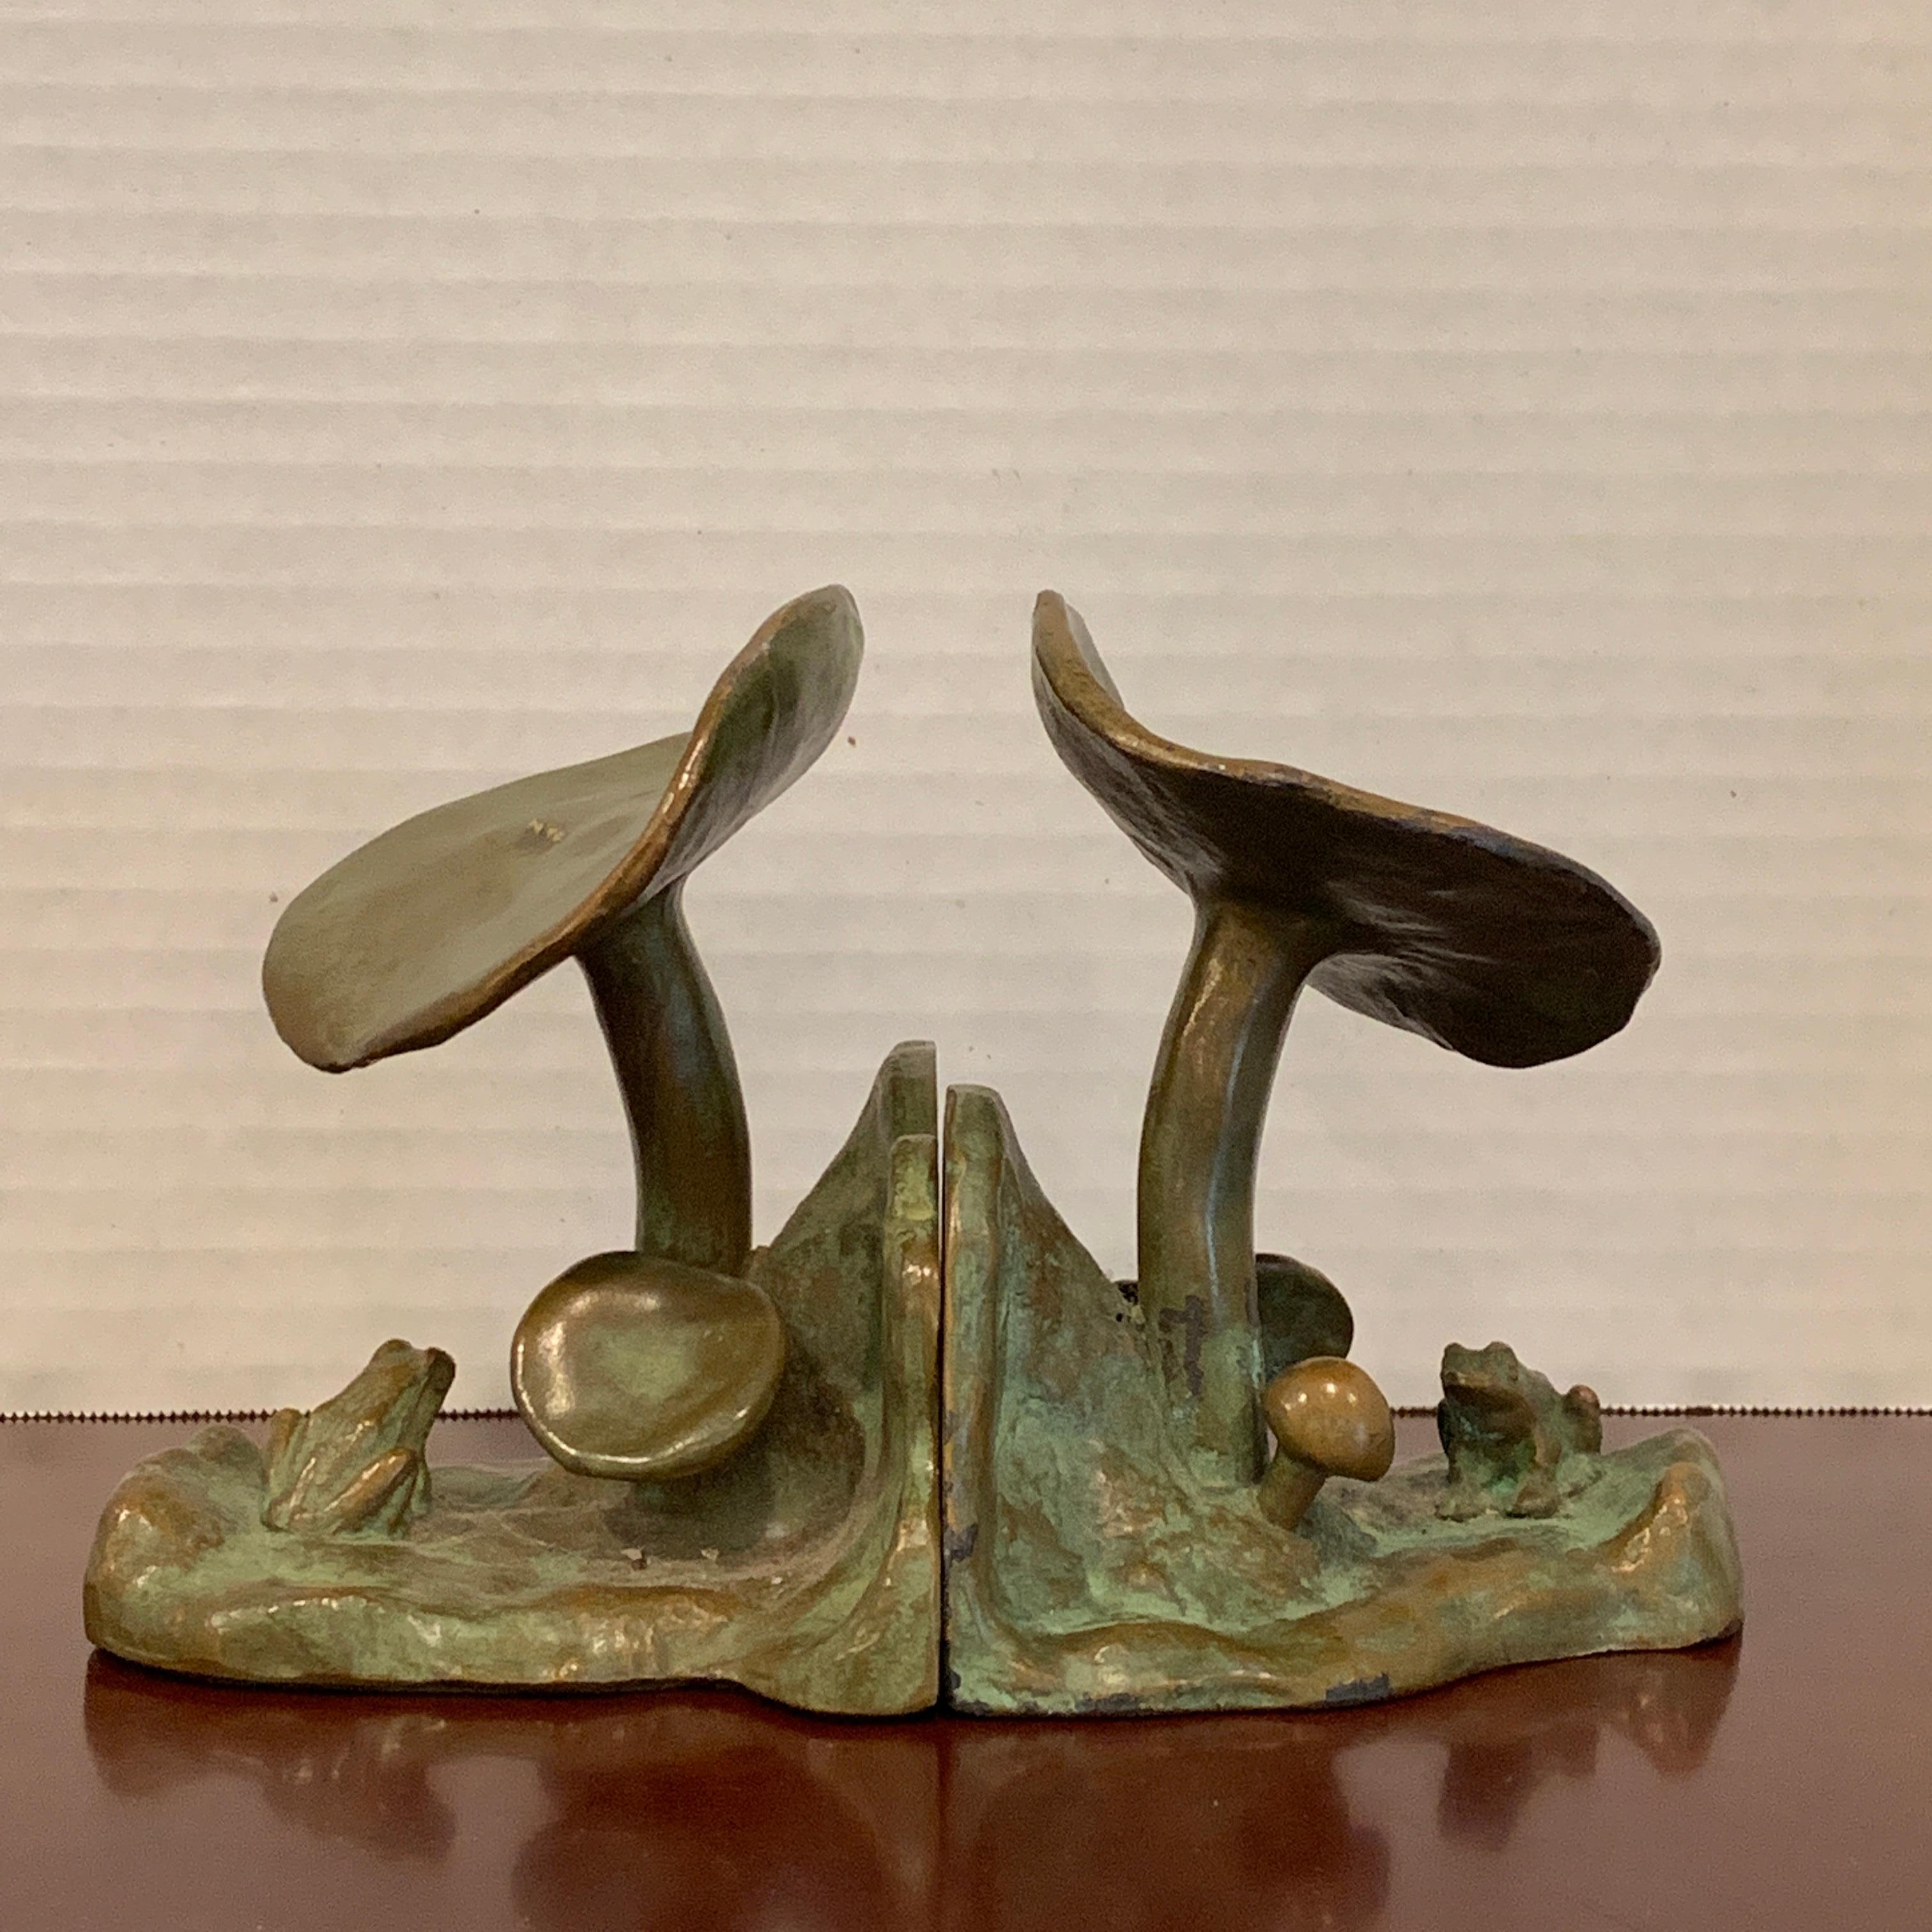 Pair of bronze mushroom and frog motif bookends by McClelland Barclay
McClelland Barclay (1891-1943), American sculptor
In two parts, each one beautifully cast of a landscape with mushrooms and a seated frog, inscribed signature on back
Each